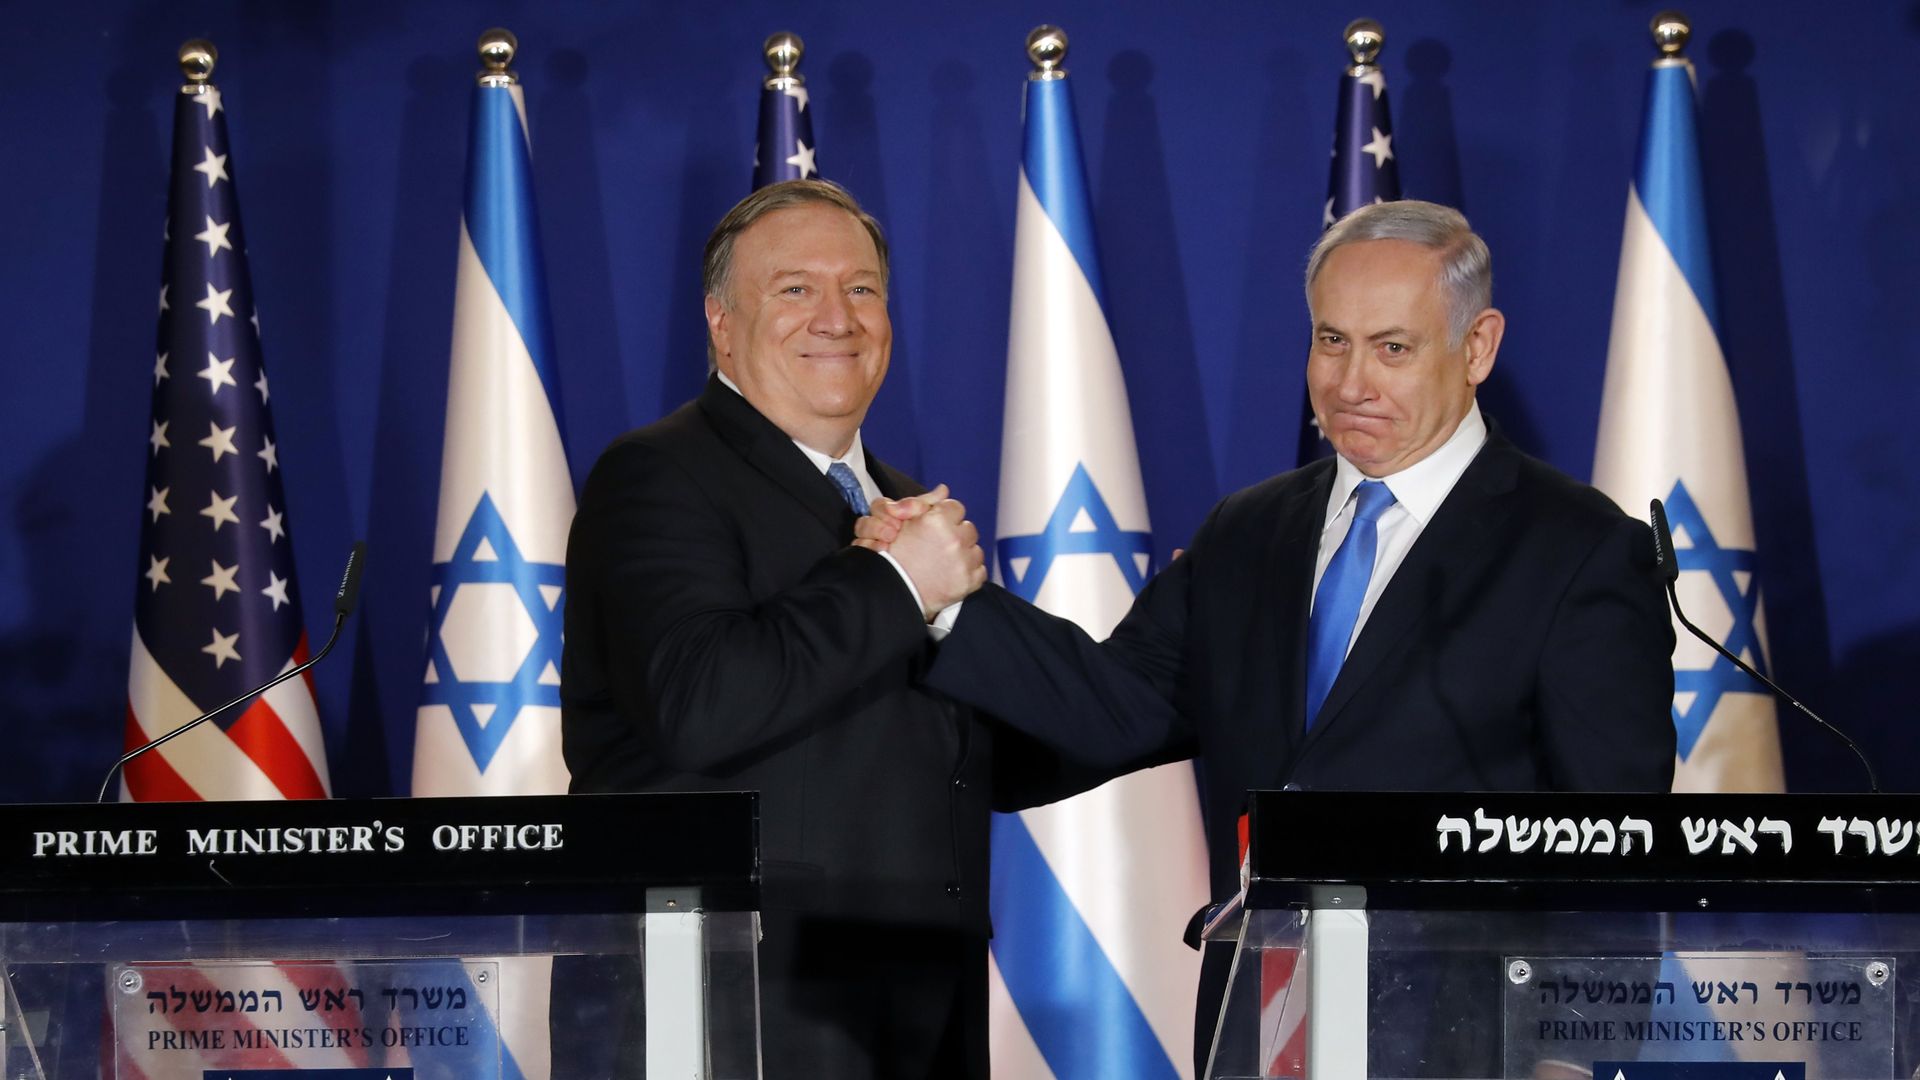 Mike Pompeo and the Israeli prime minister shake hands in front of a row of Israel and American flags, standing behind two podiums. 